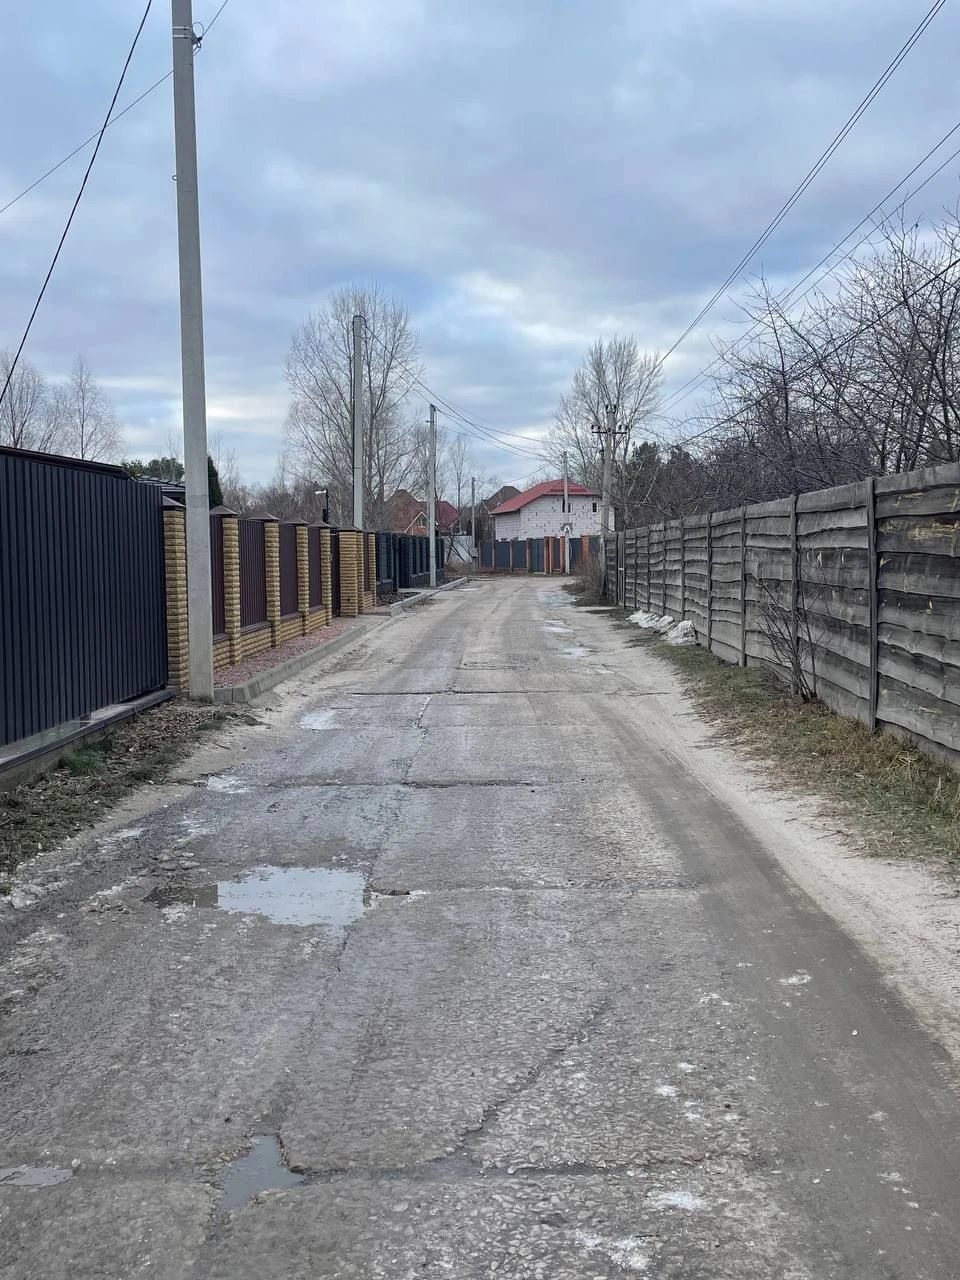 Land for sale for residential construction. Kyyliv. 